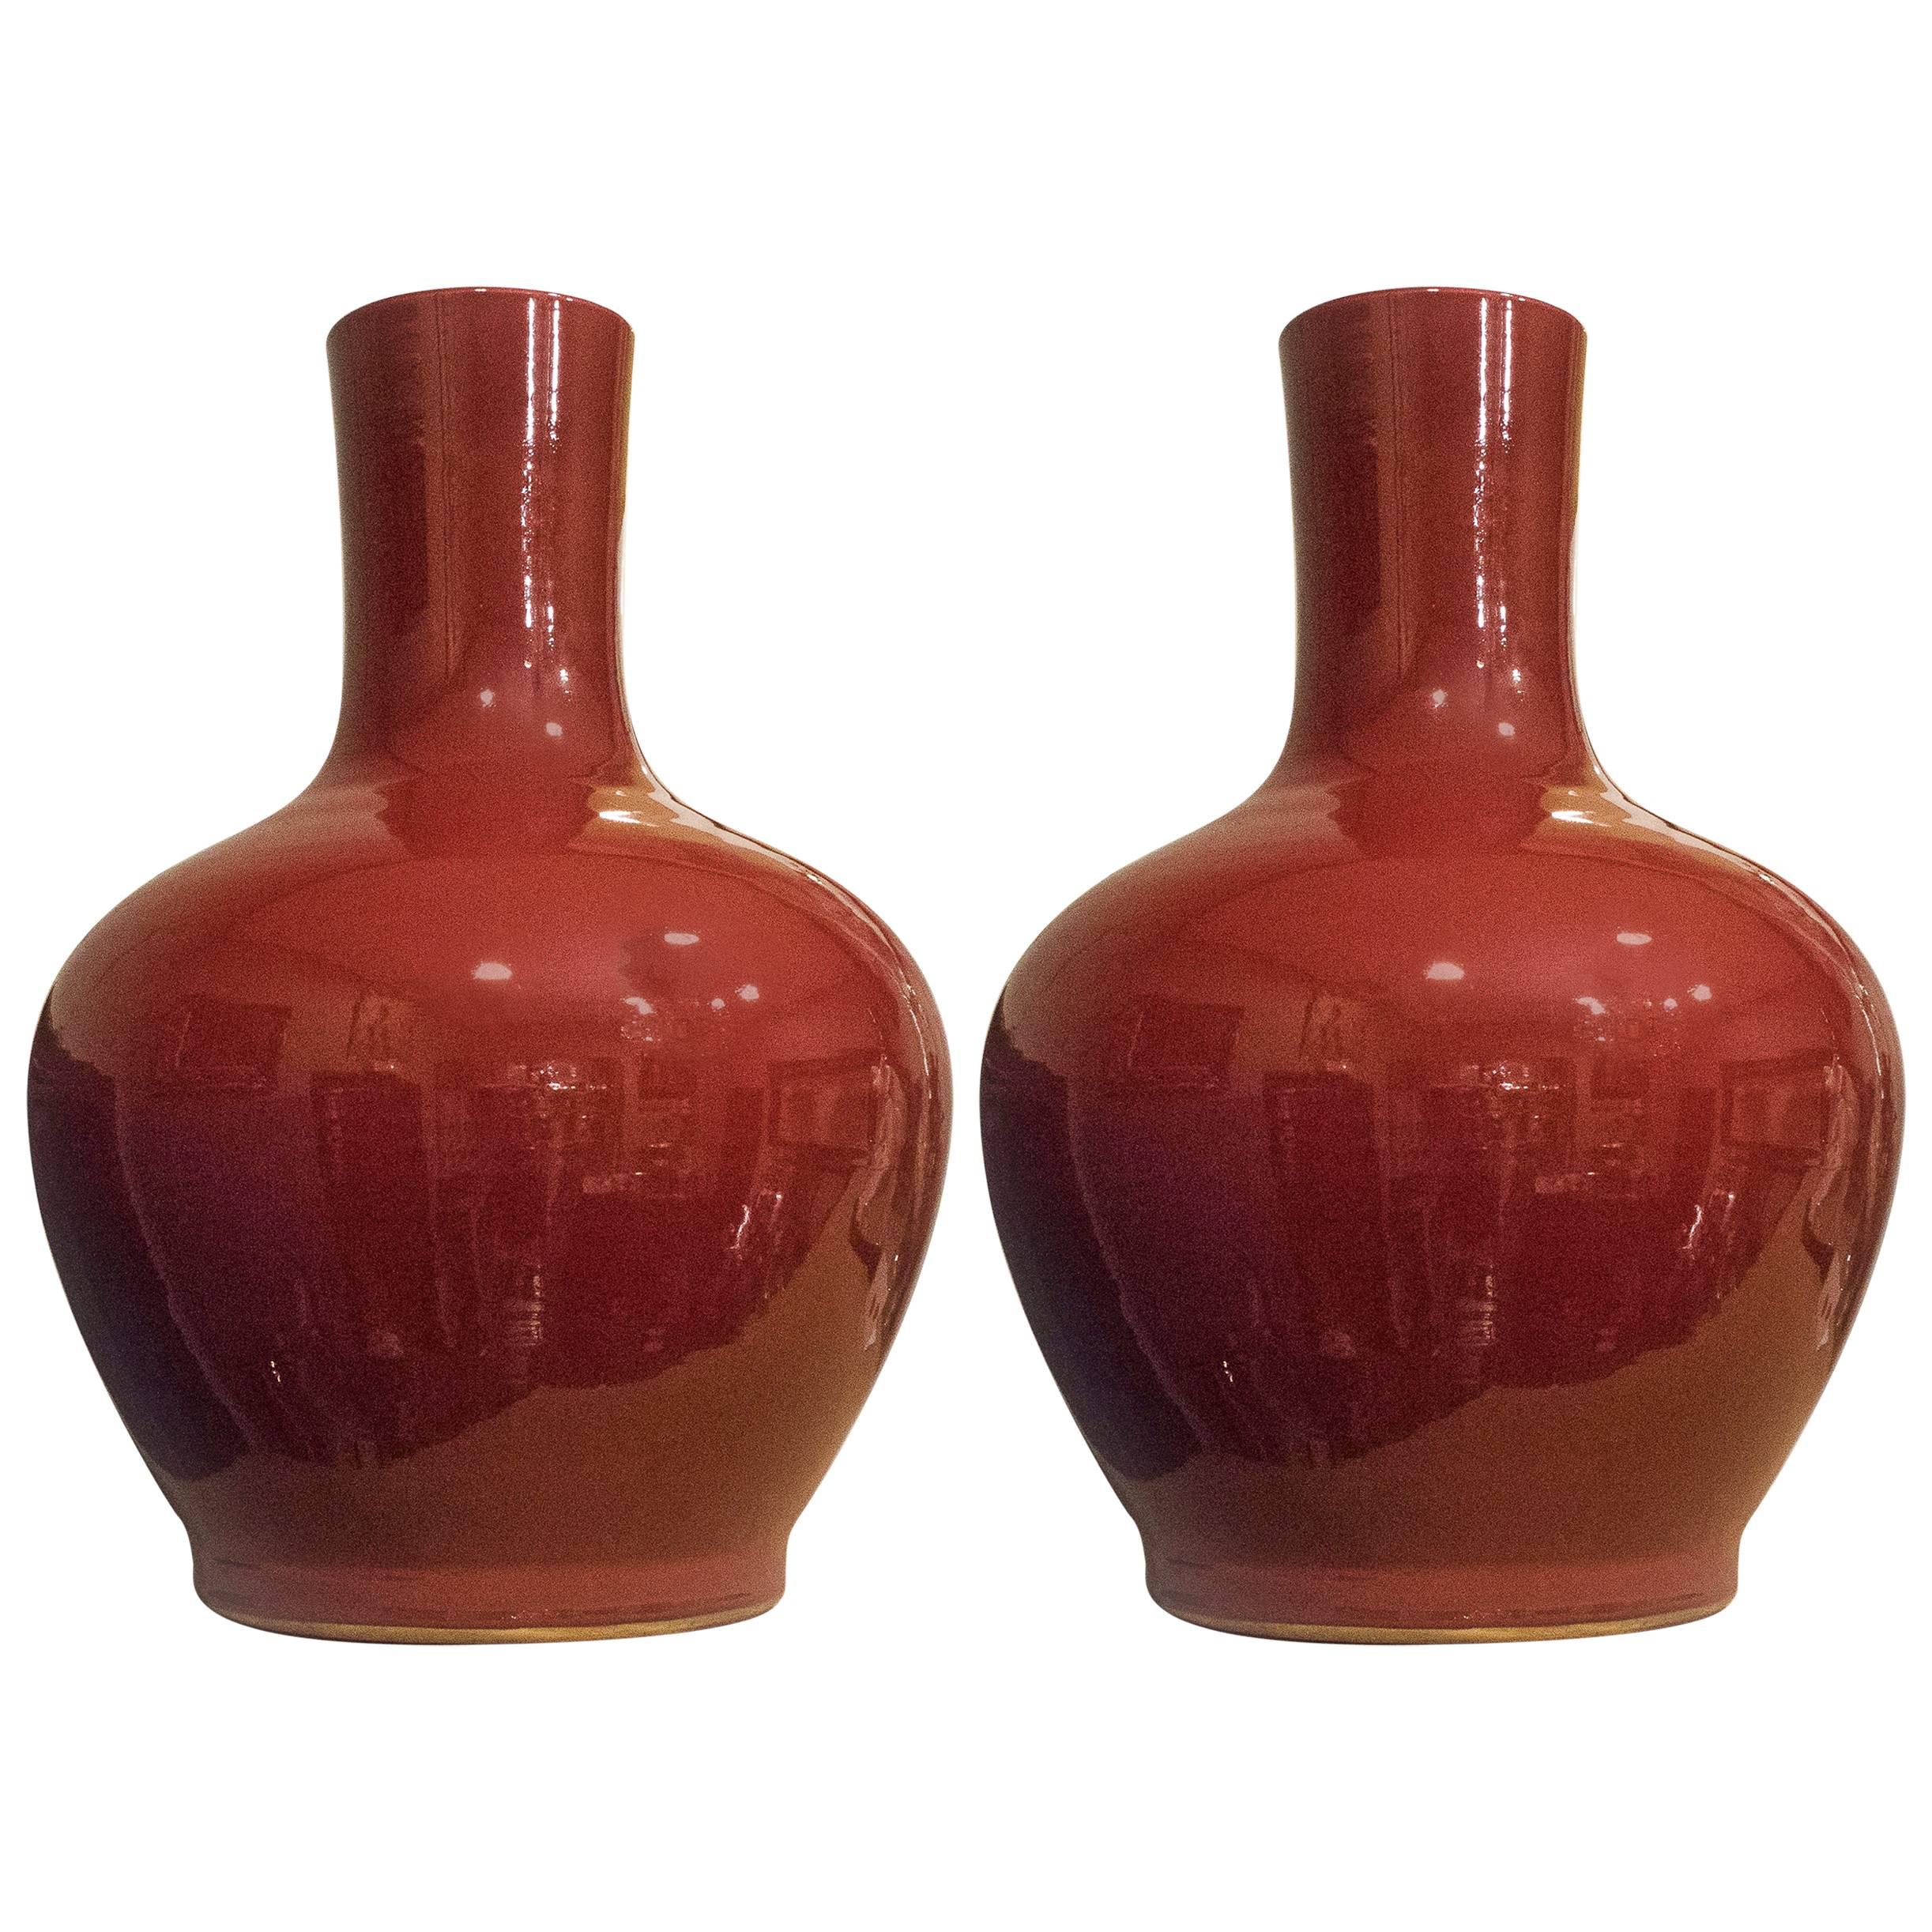 1980s Chinese Porcelain Couple of Midcentury Red Vases "Sang of Boeuf"